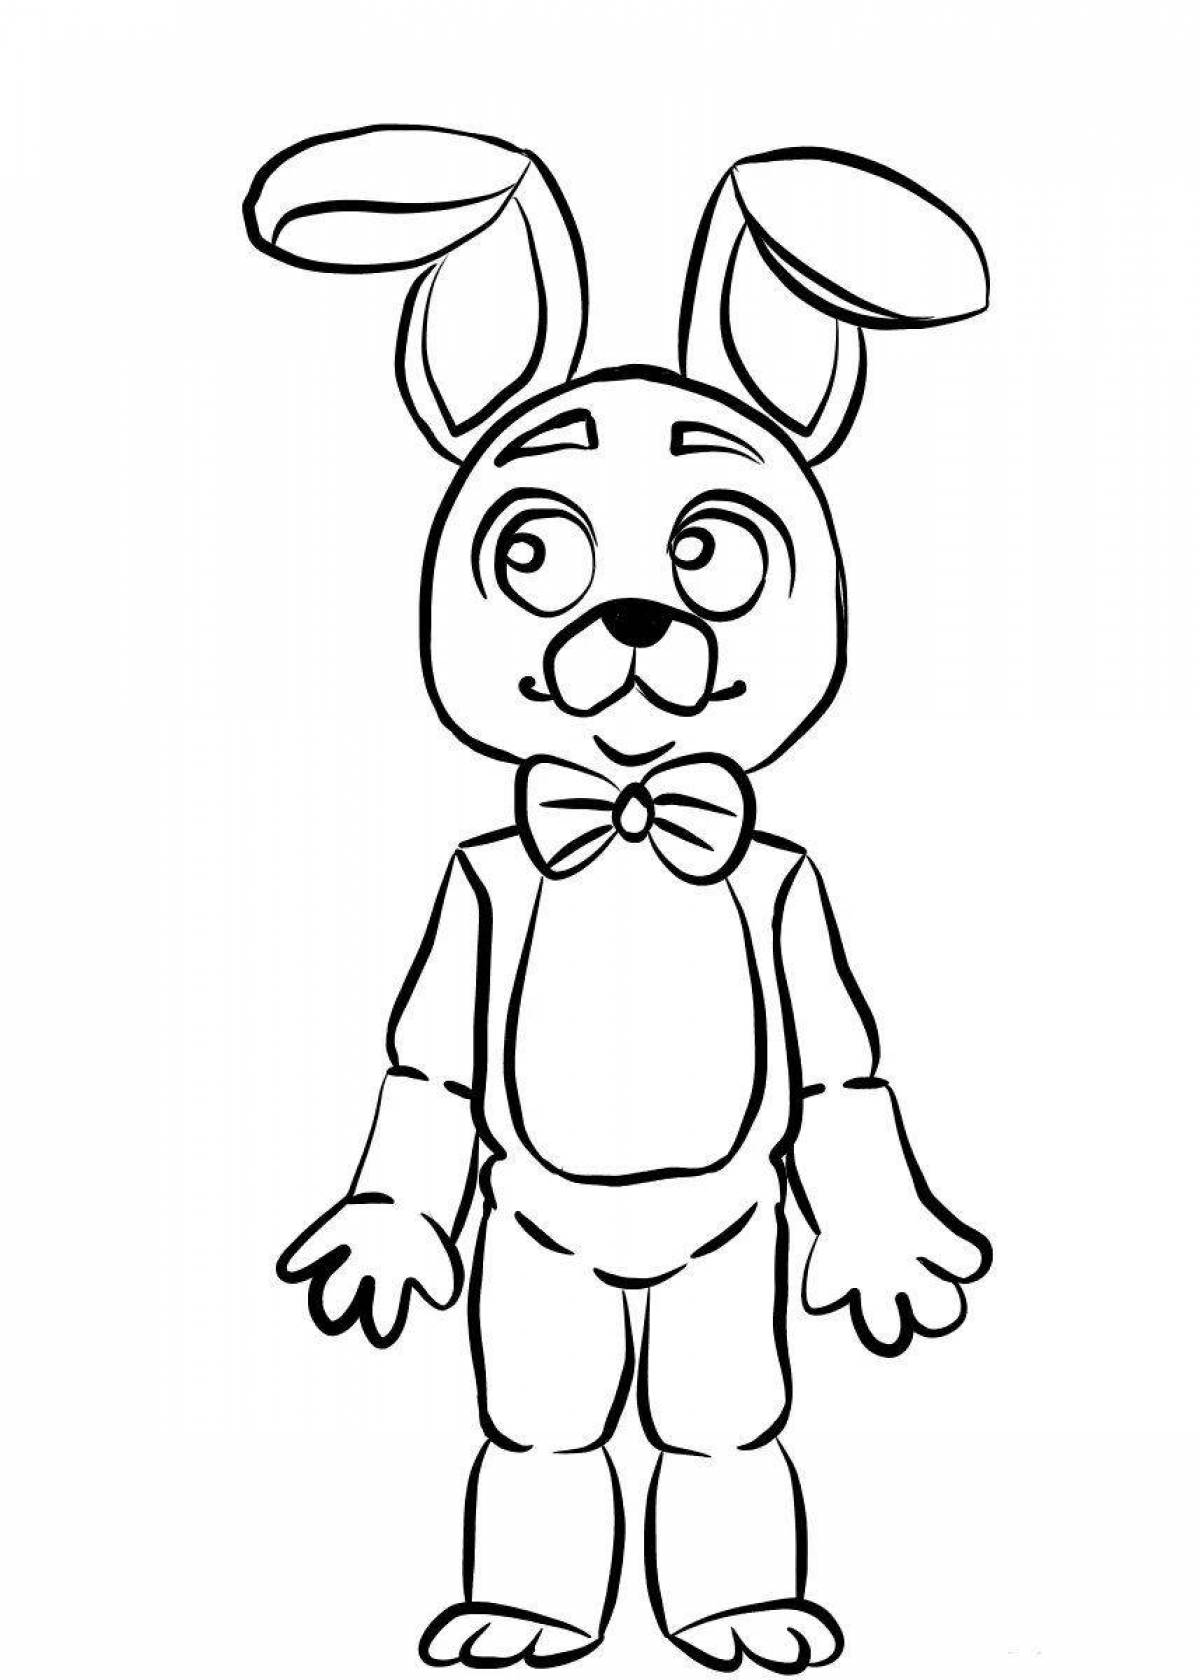 Bonnie's animated coloring page